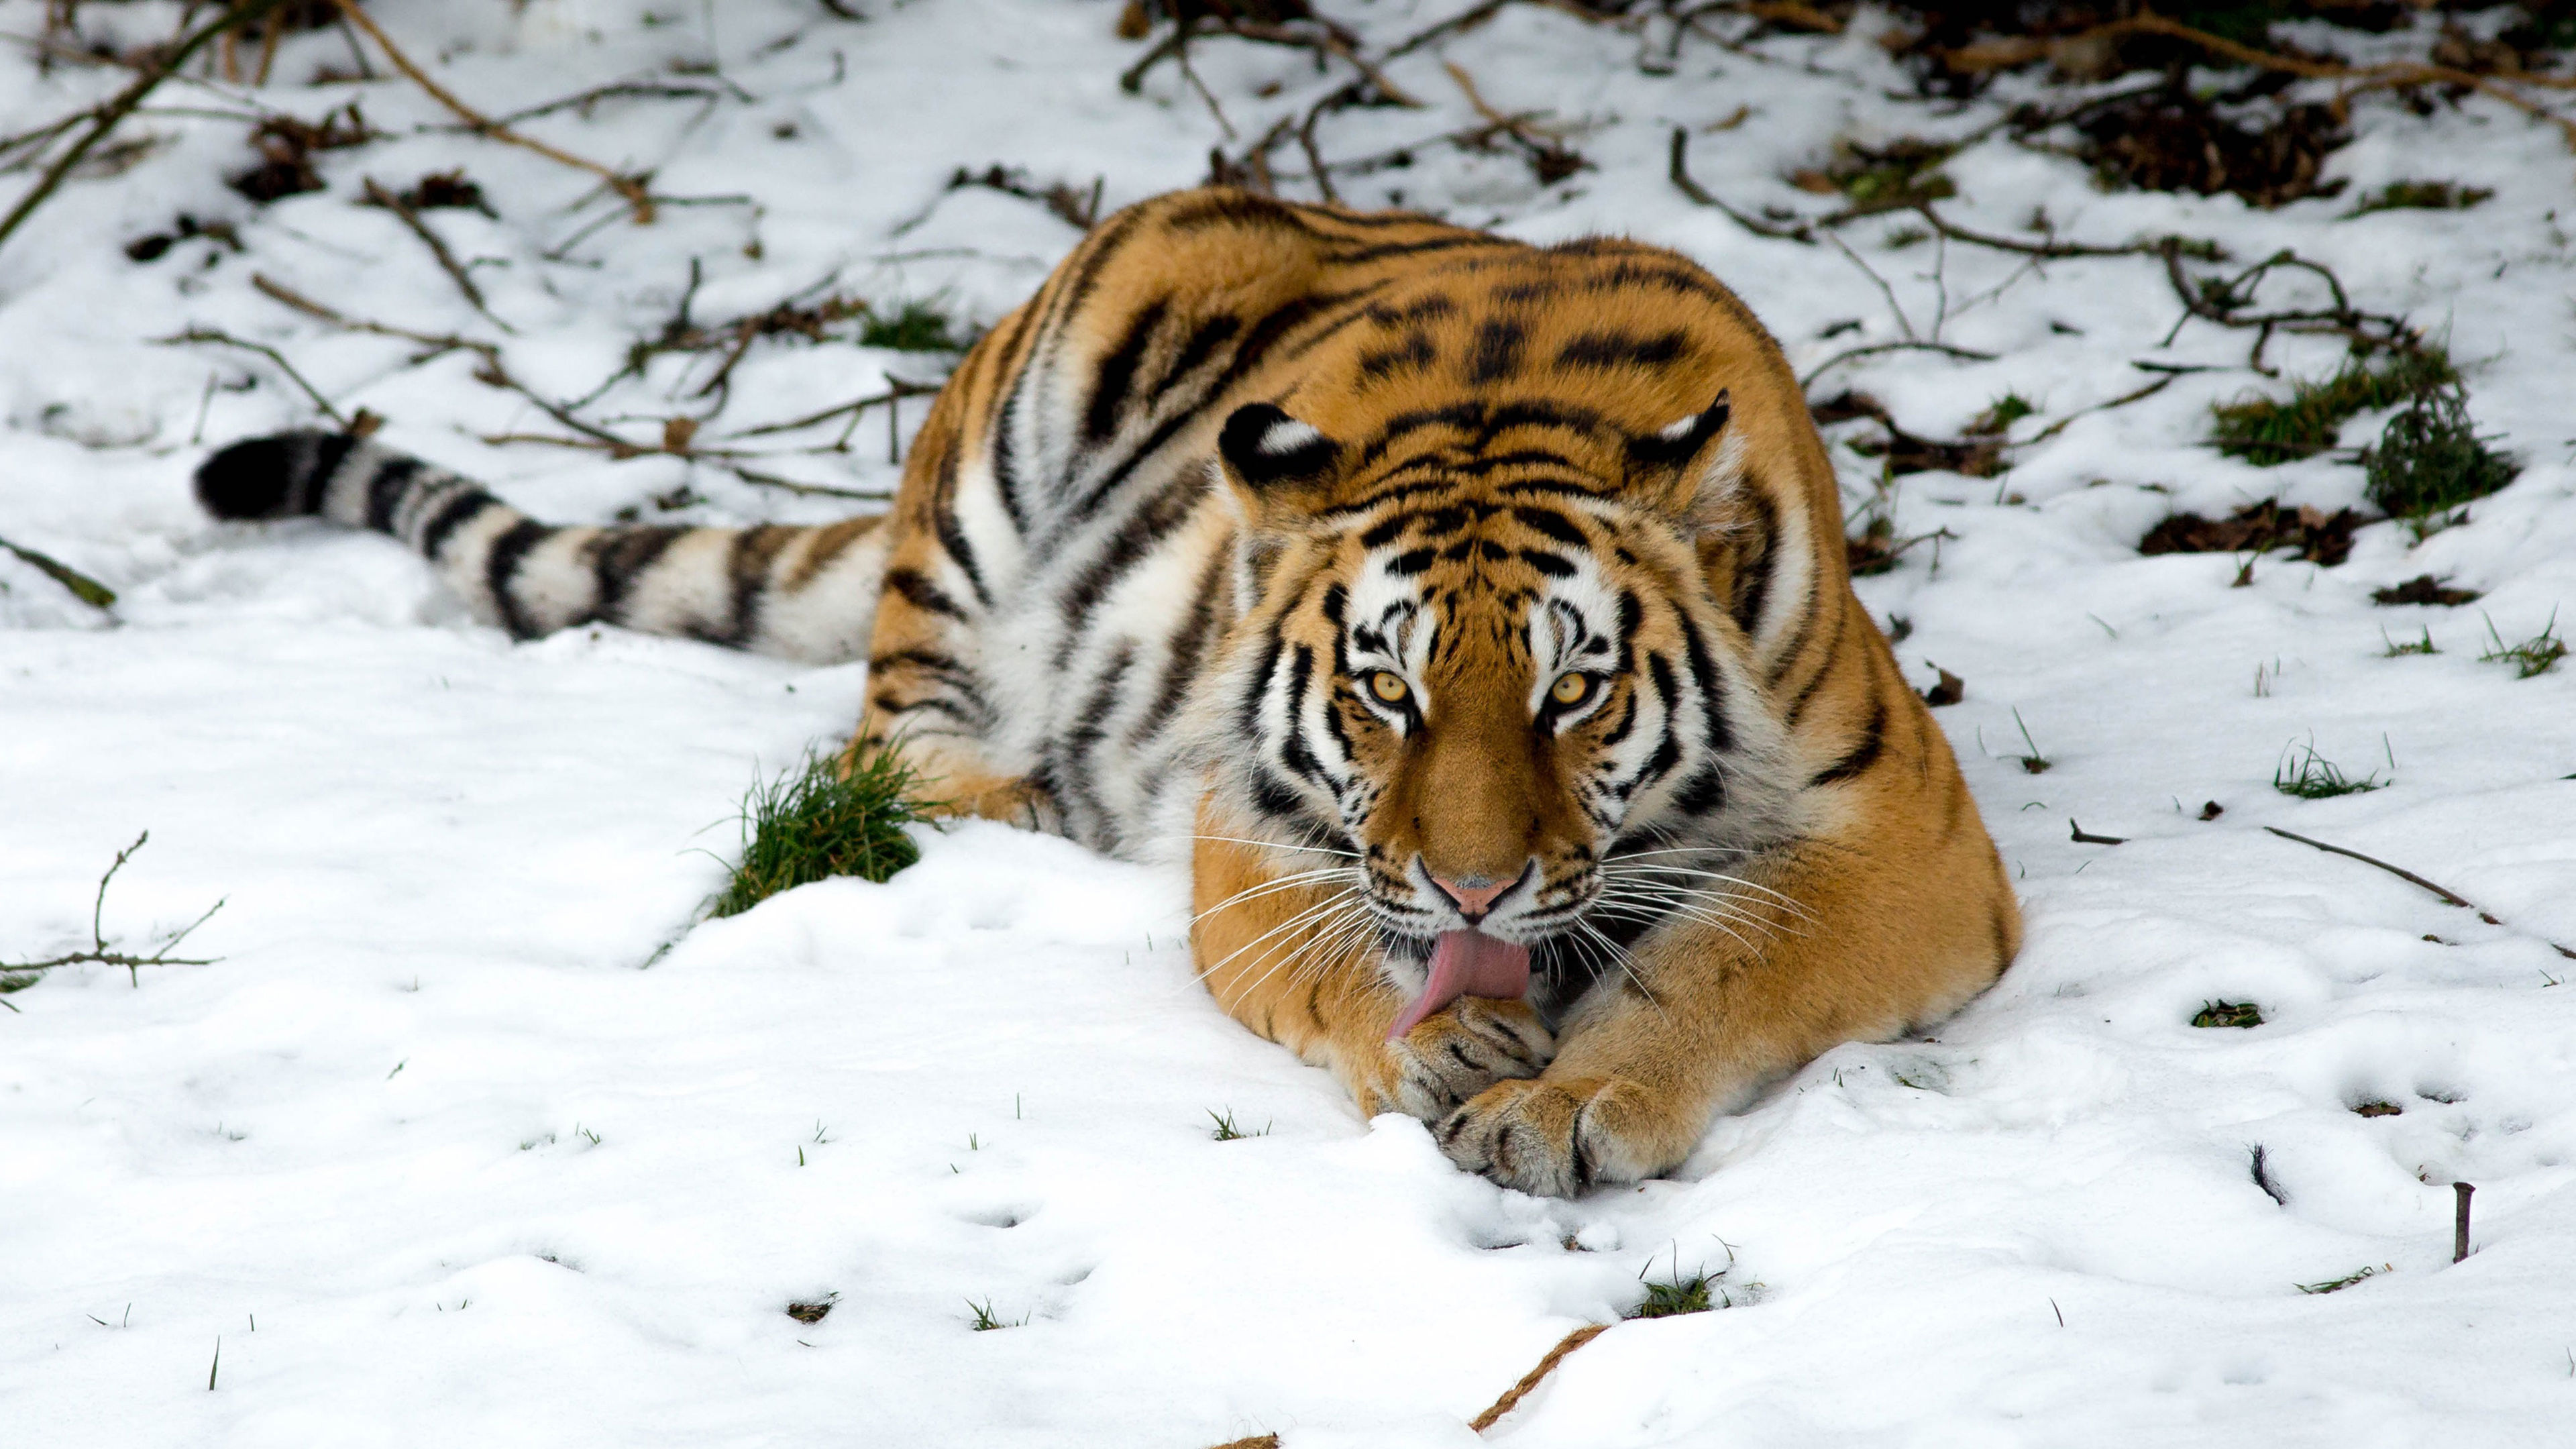 Tiger in Snow Wallpapers